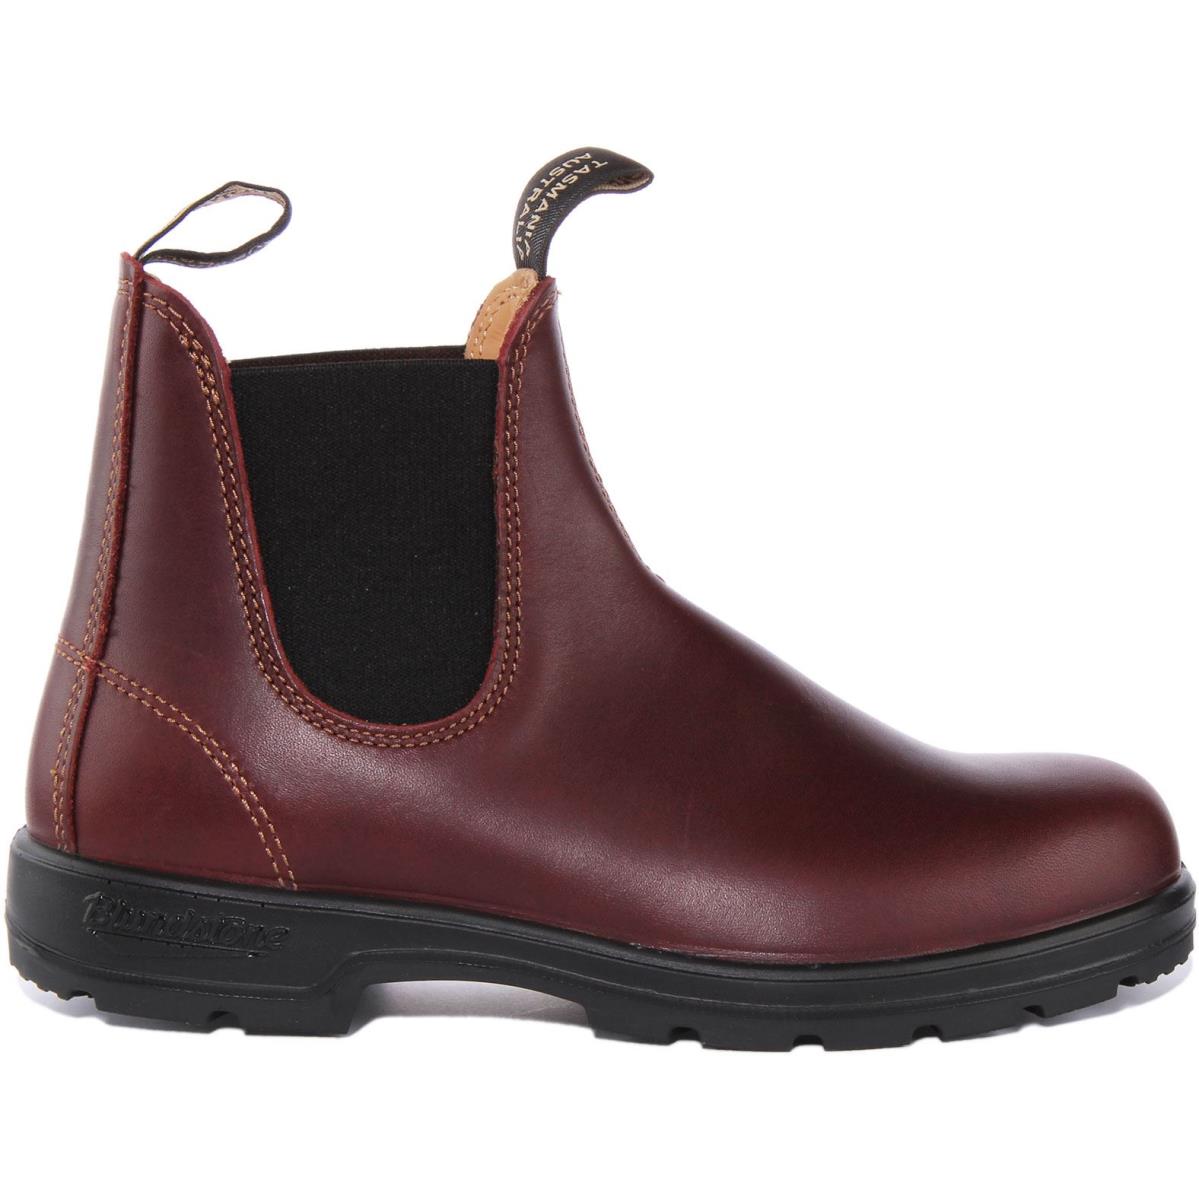 Blundstone 1440 Unisex Round Toe Leather Chelsea Boot In Burgundy Size US 7 - 13